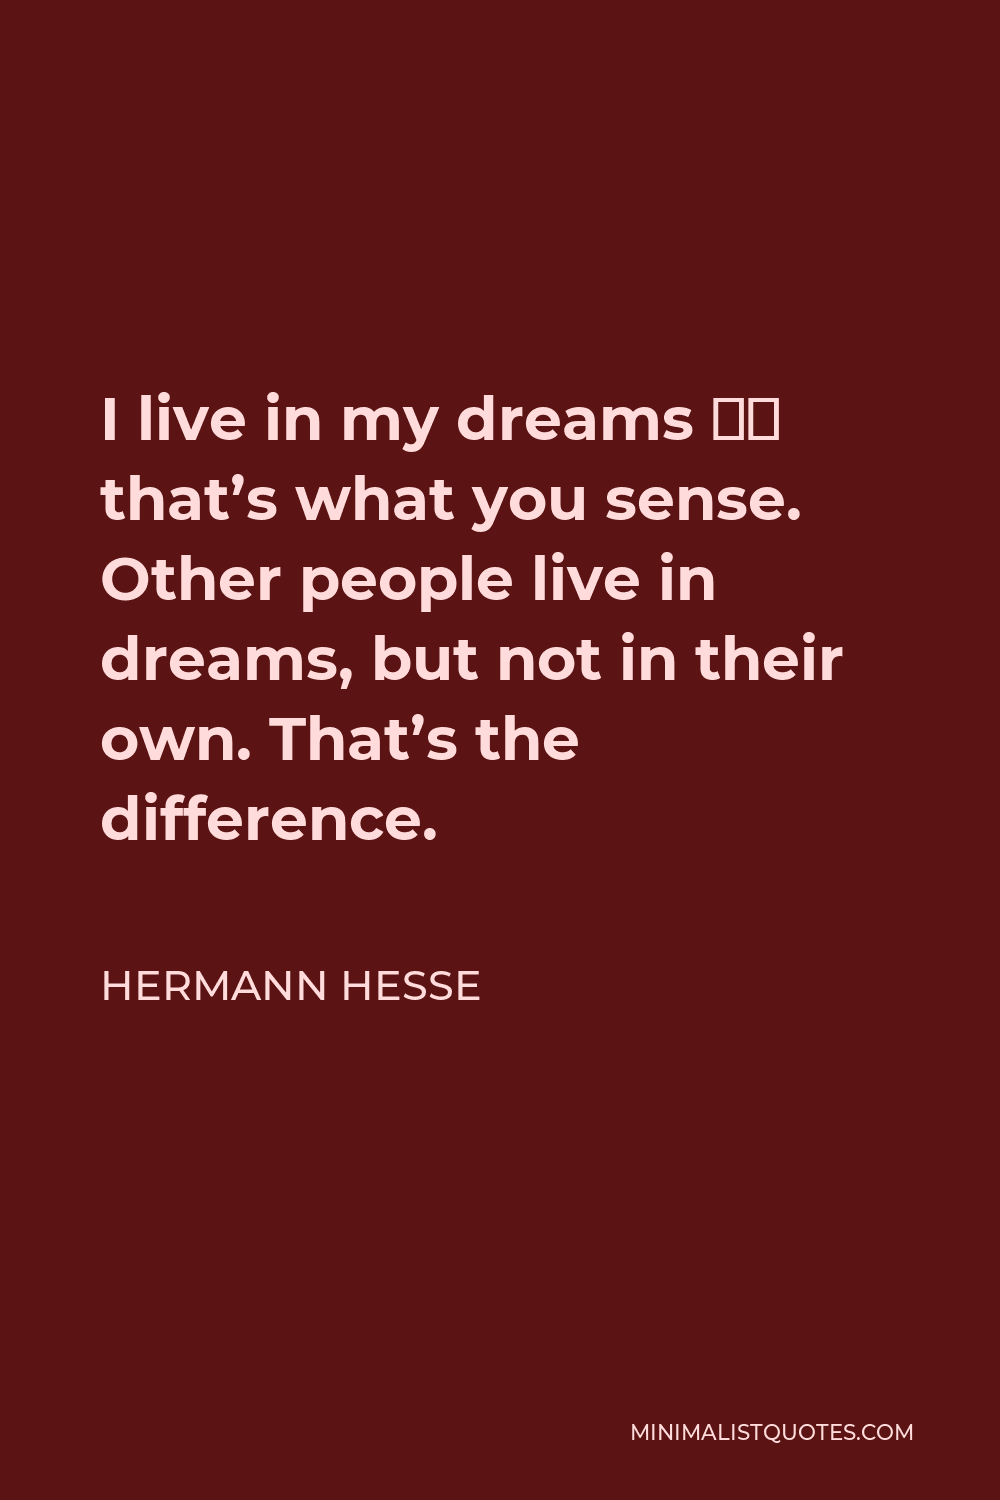 Hermann Hesse Quote - I live in my dreams — that’s what you sense. Other people live in dreams, but not in their own. That’s the difference.